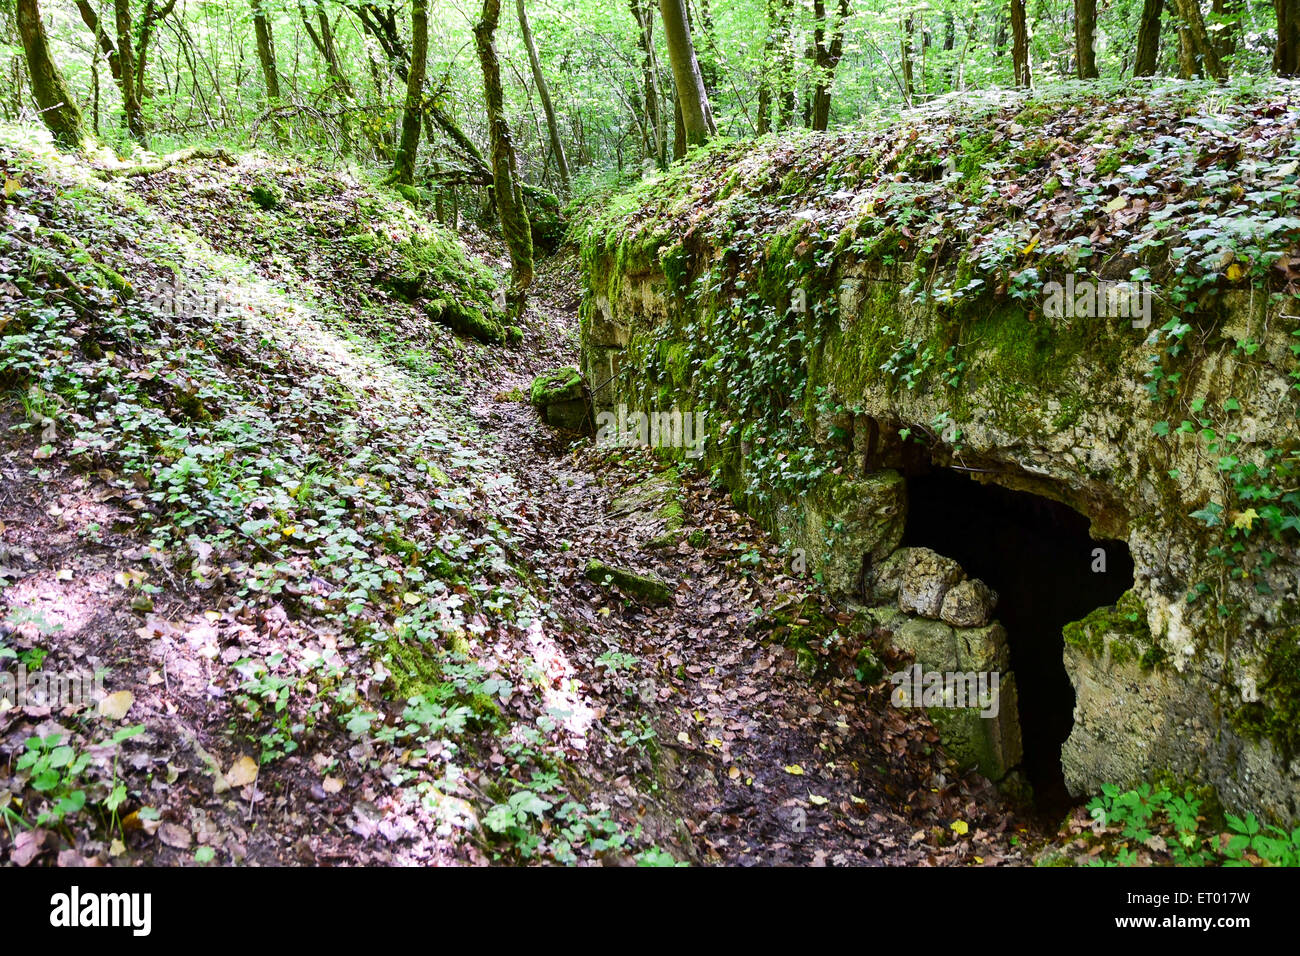 Original German WW1 trench dugout in St Mihiel Salient, Bois d'Ailly forest, Lorraine, France Stock Photo